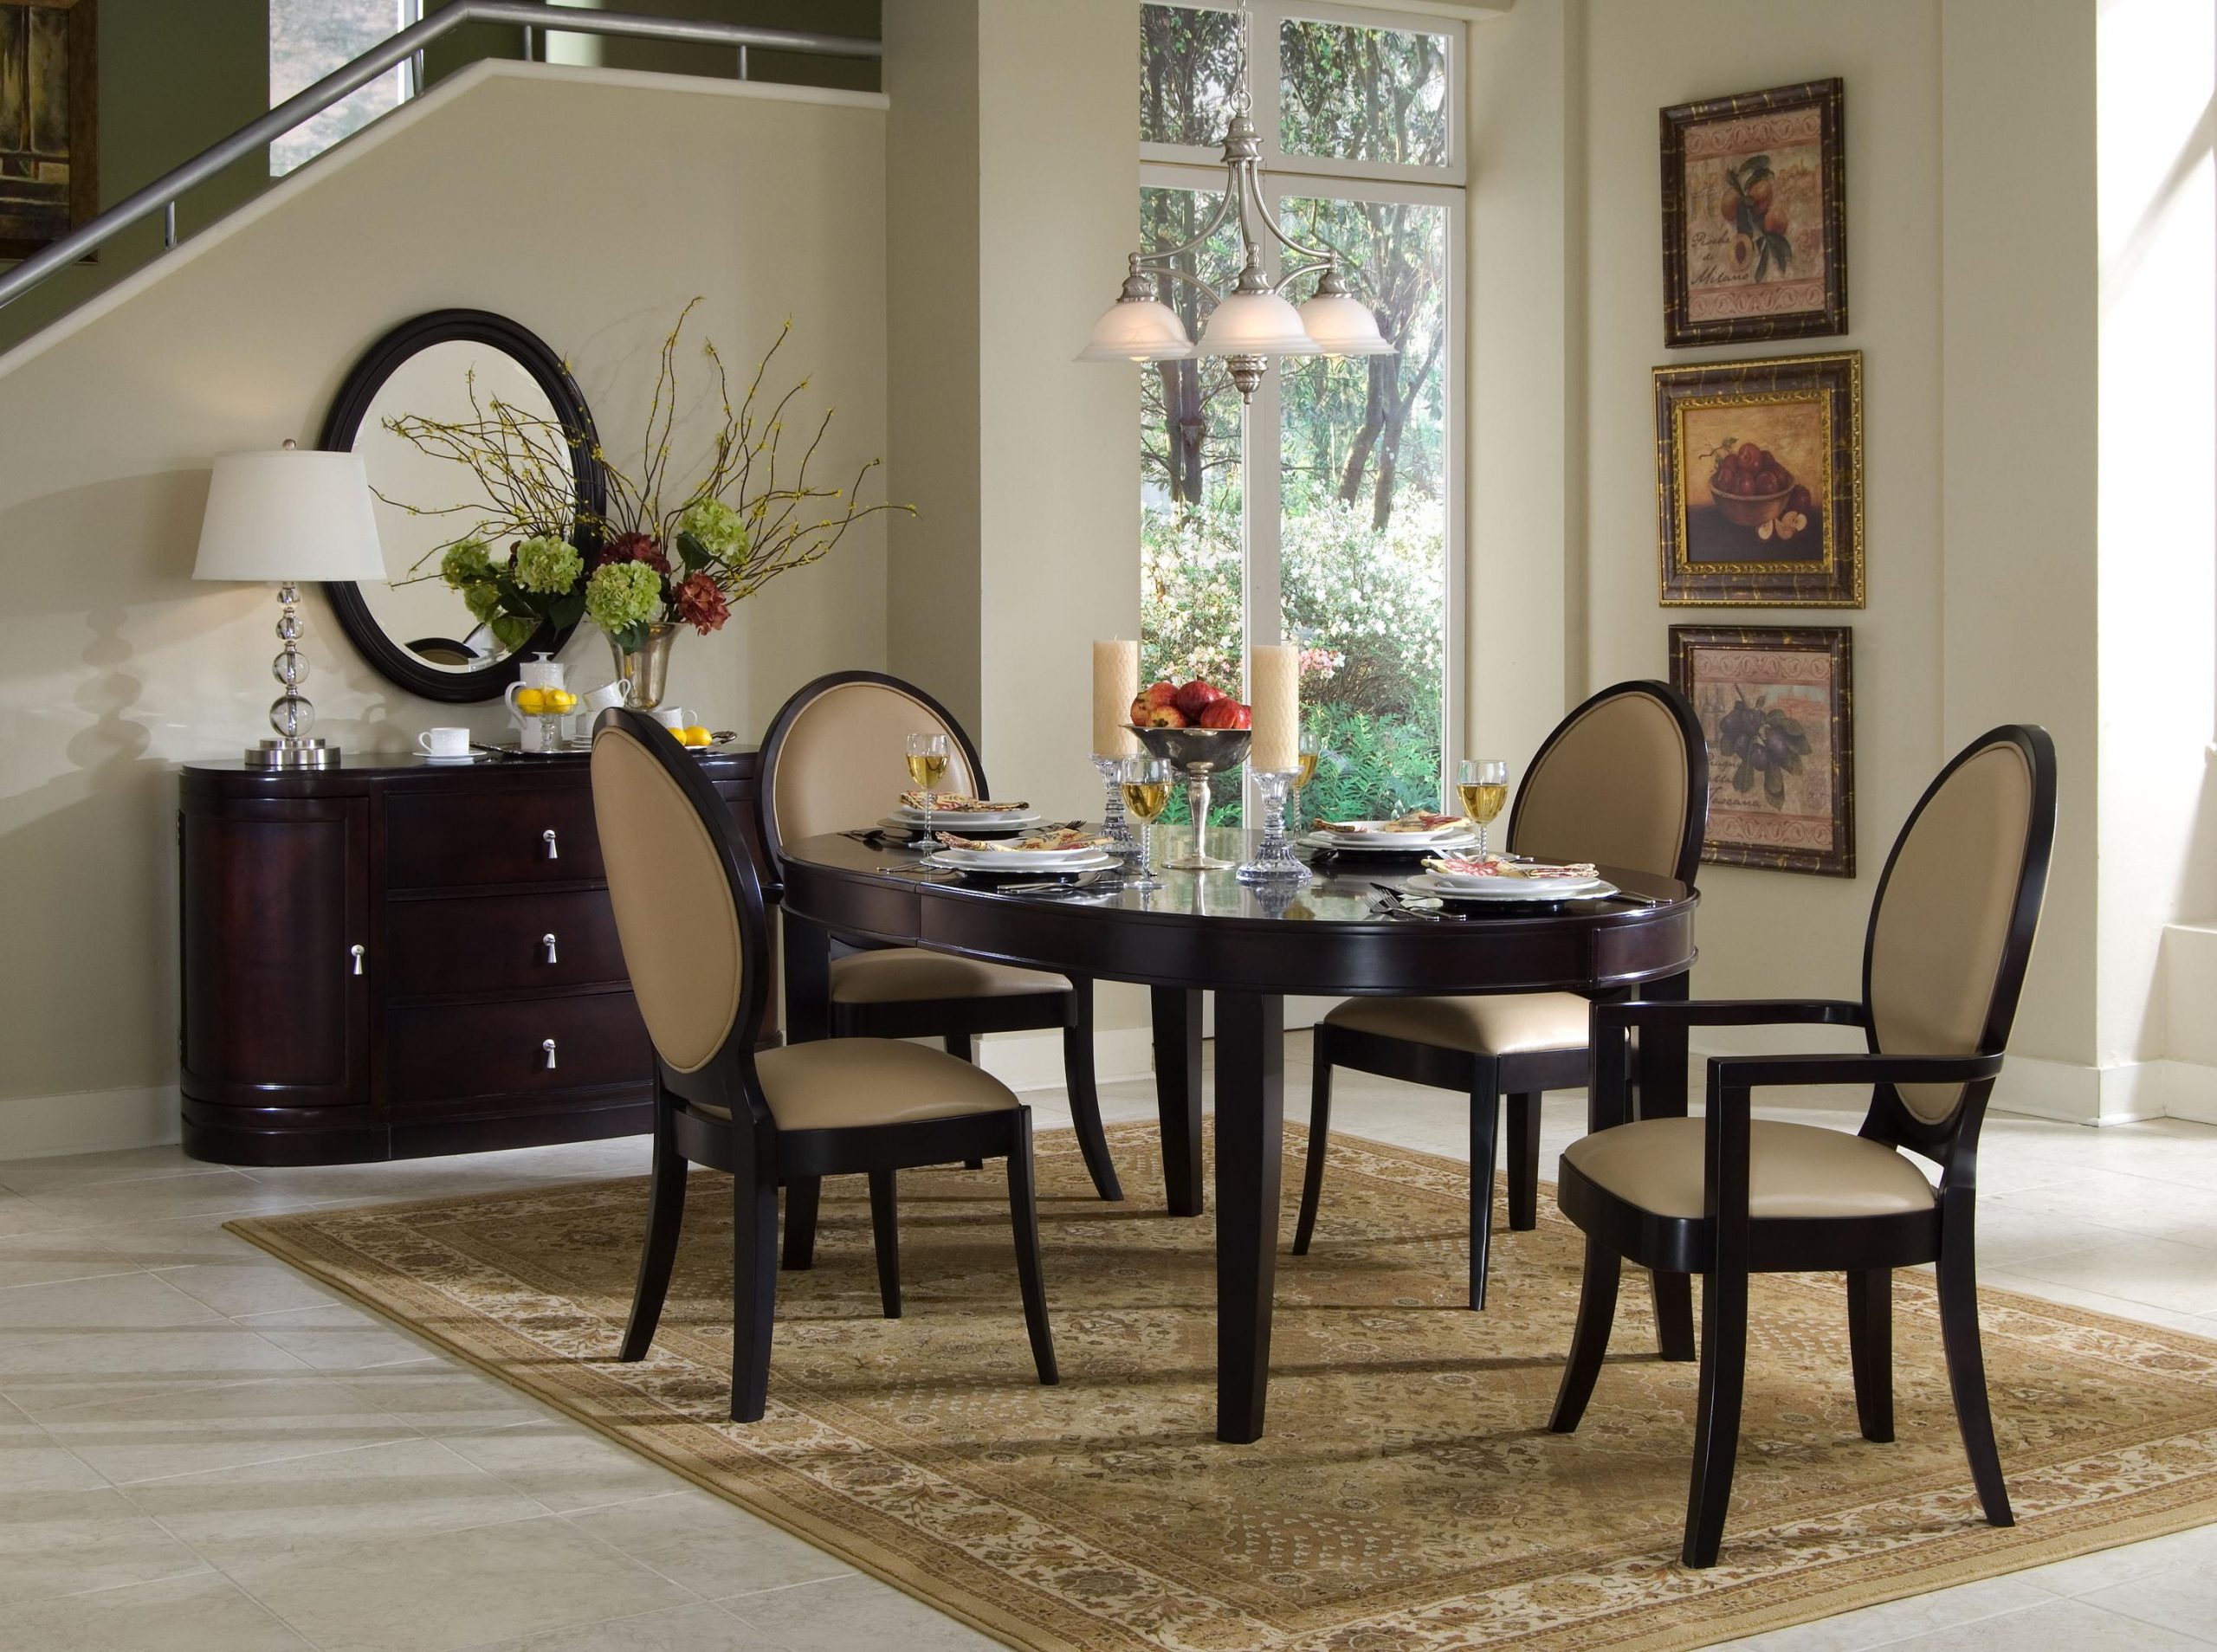 Oval Dining Room Table And Chairs Oval Dining Table Set regarding sizing 2899 X 2161